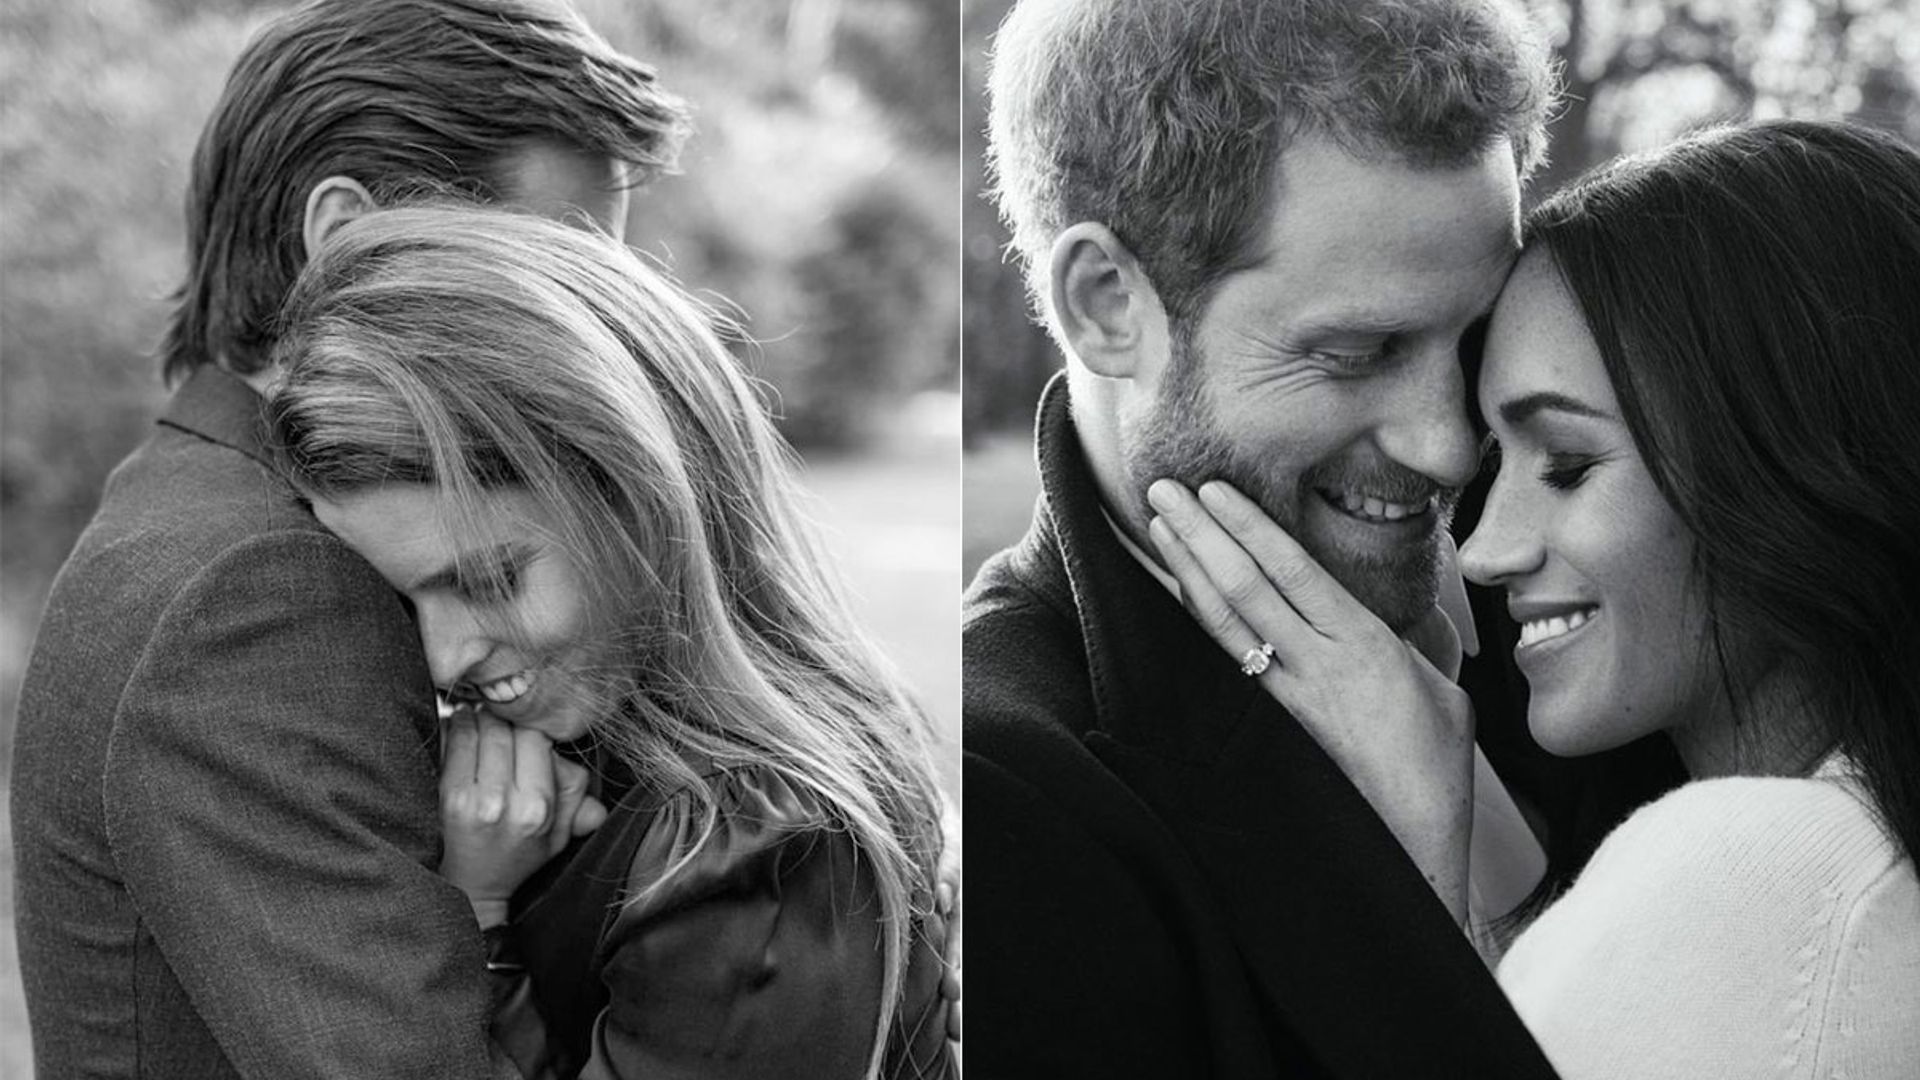 beatrice and meghan engagement pictures compared